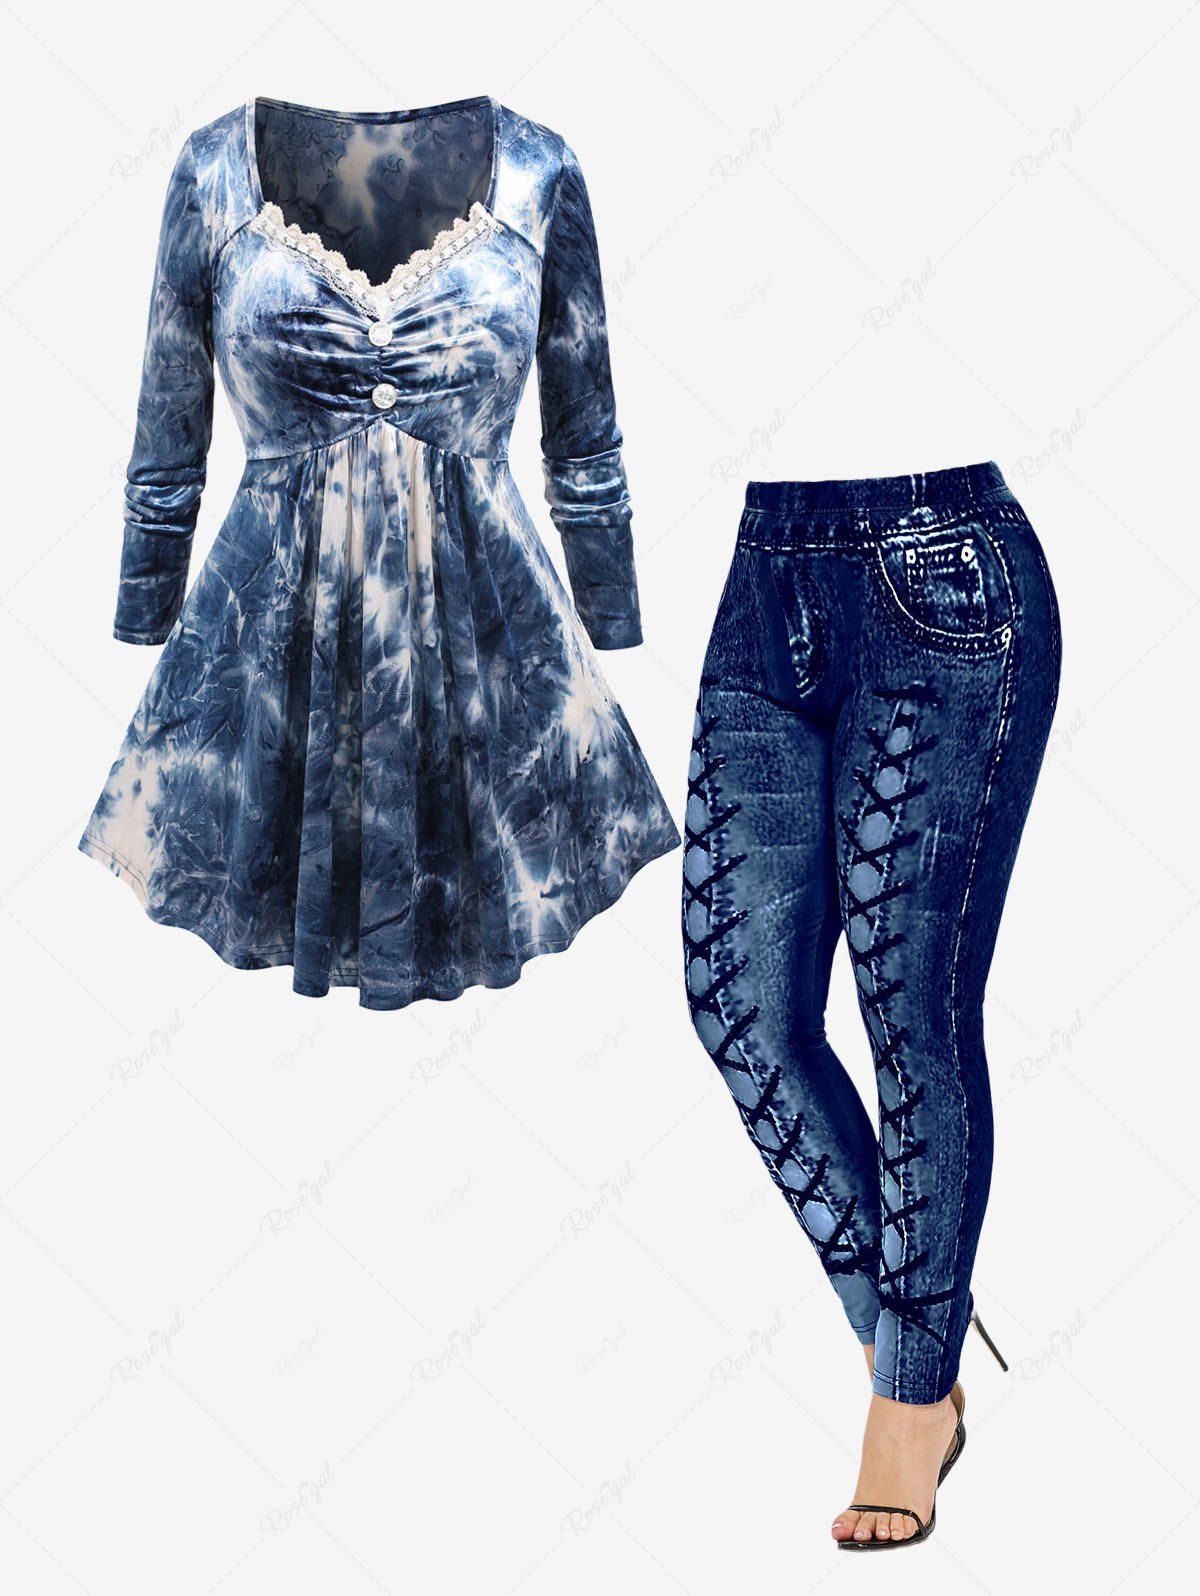 New Tie Dye Mock Buttons Lace Trim Ruched Long Sleeves T-shirt and High Waisted 3D Printed Leggings Plus Size Outfit  